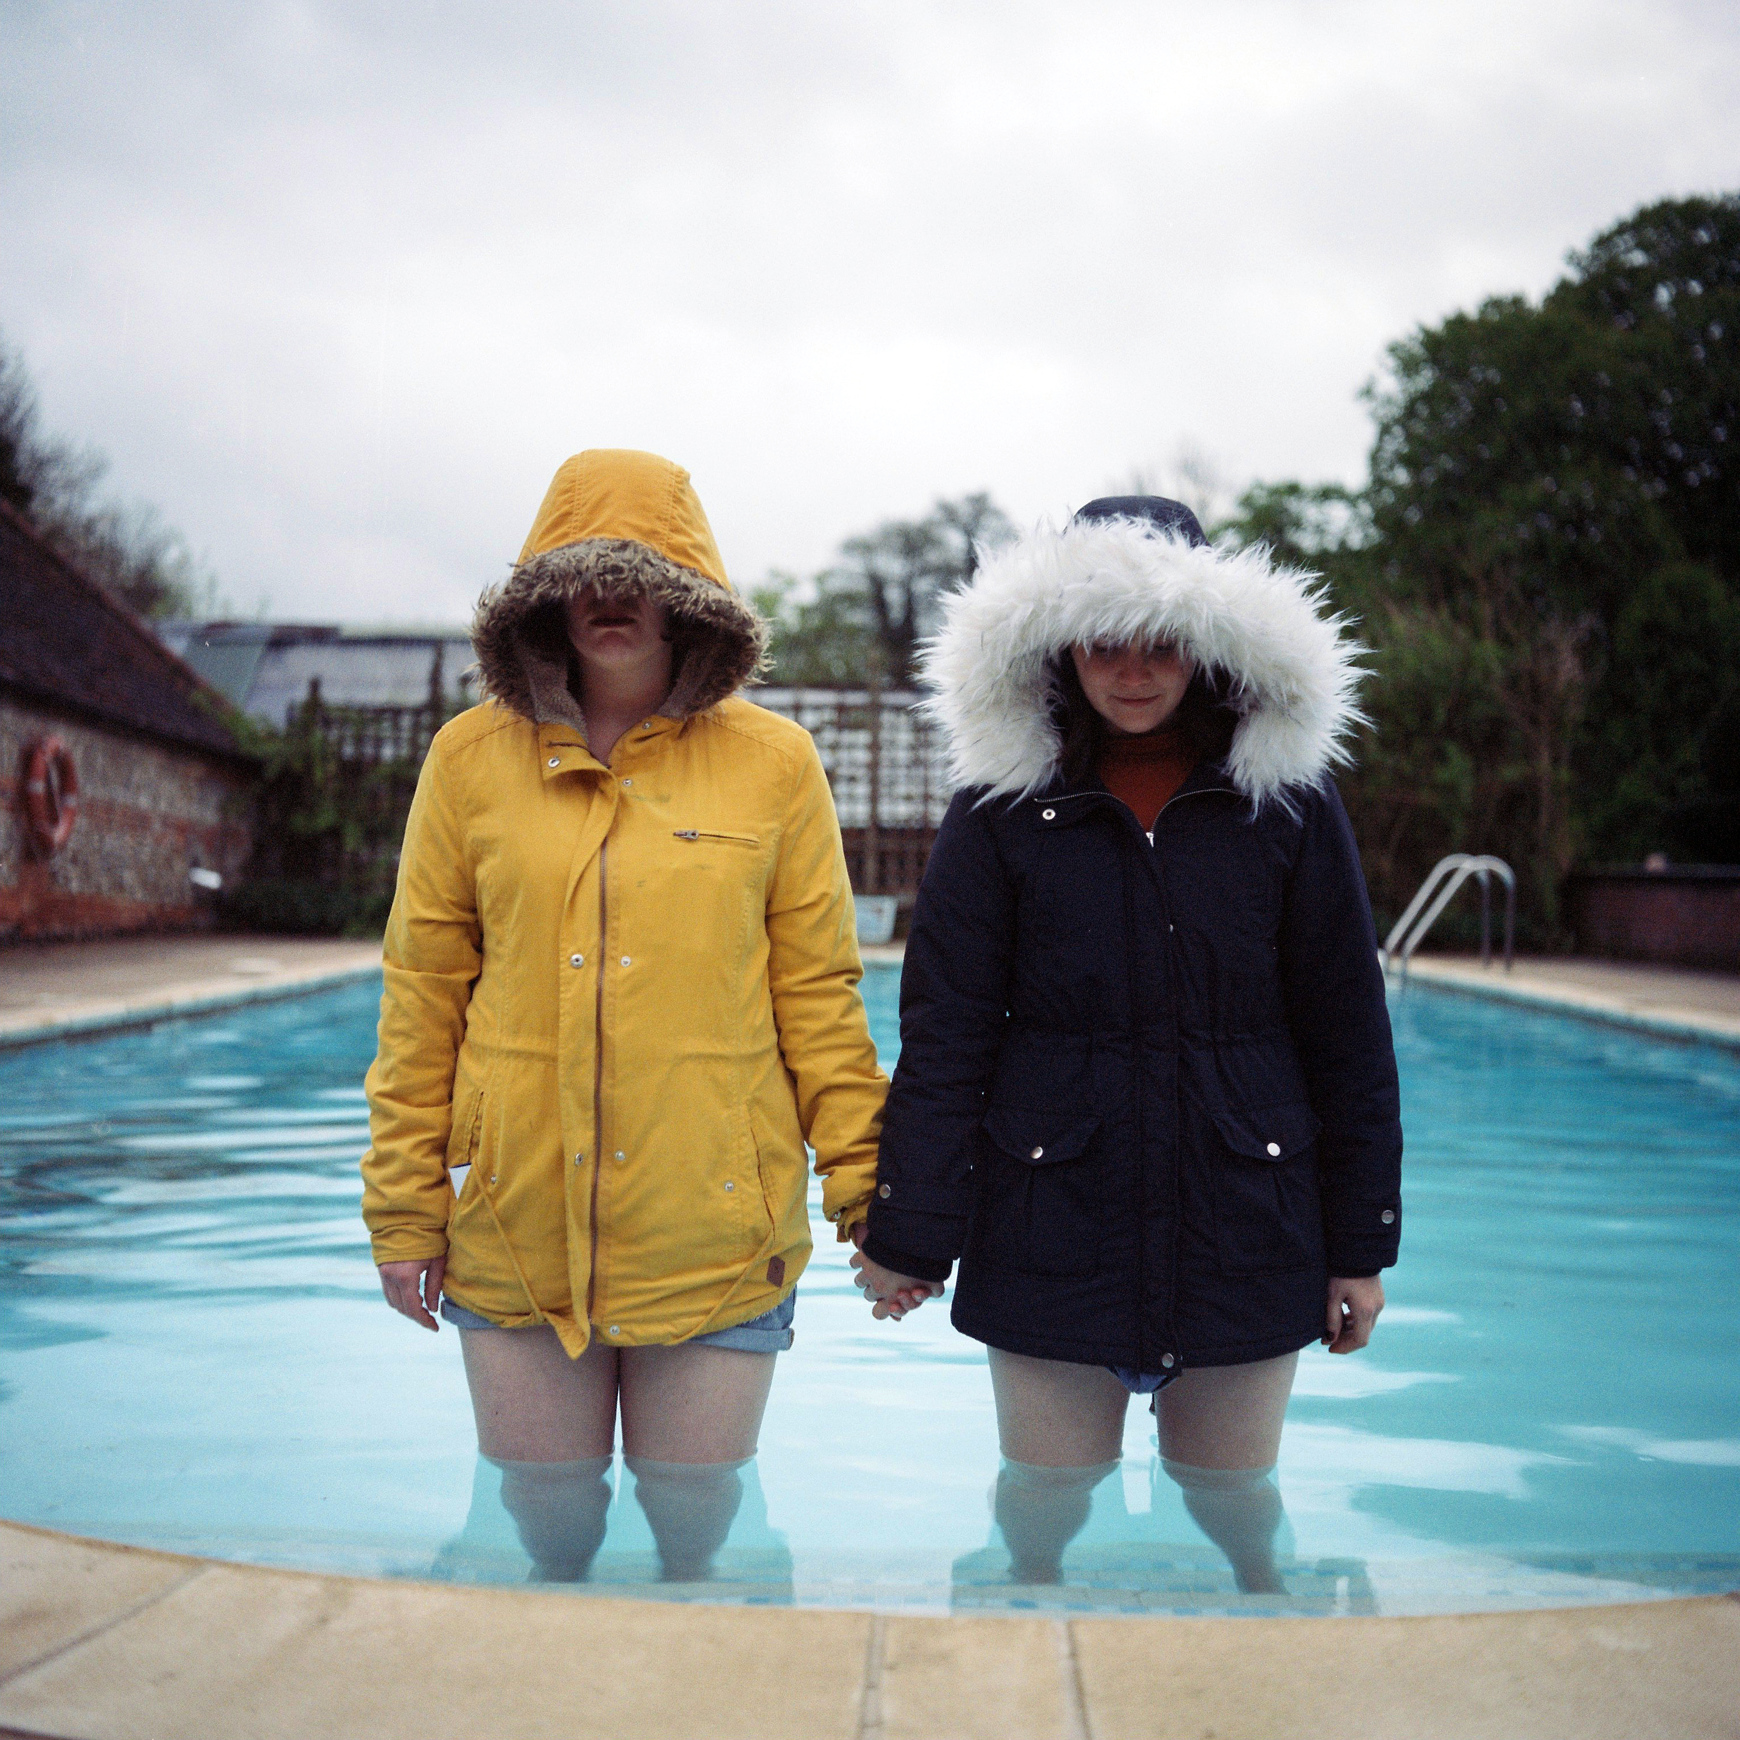 just casually standing in coats in a swimming pool